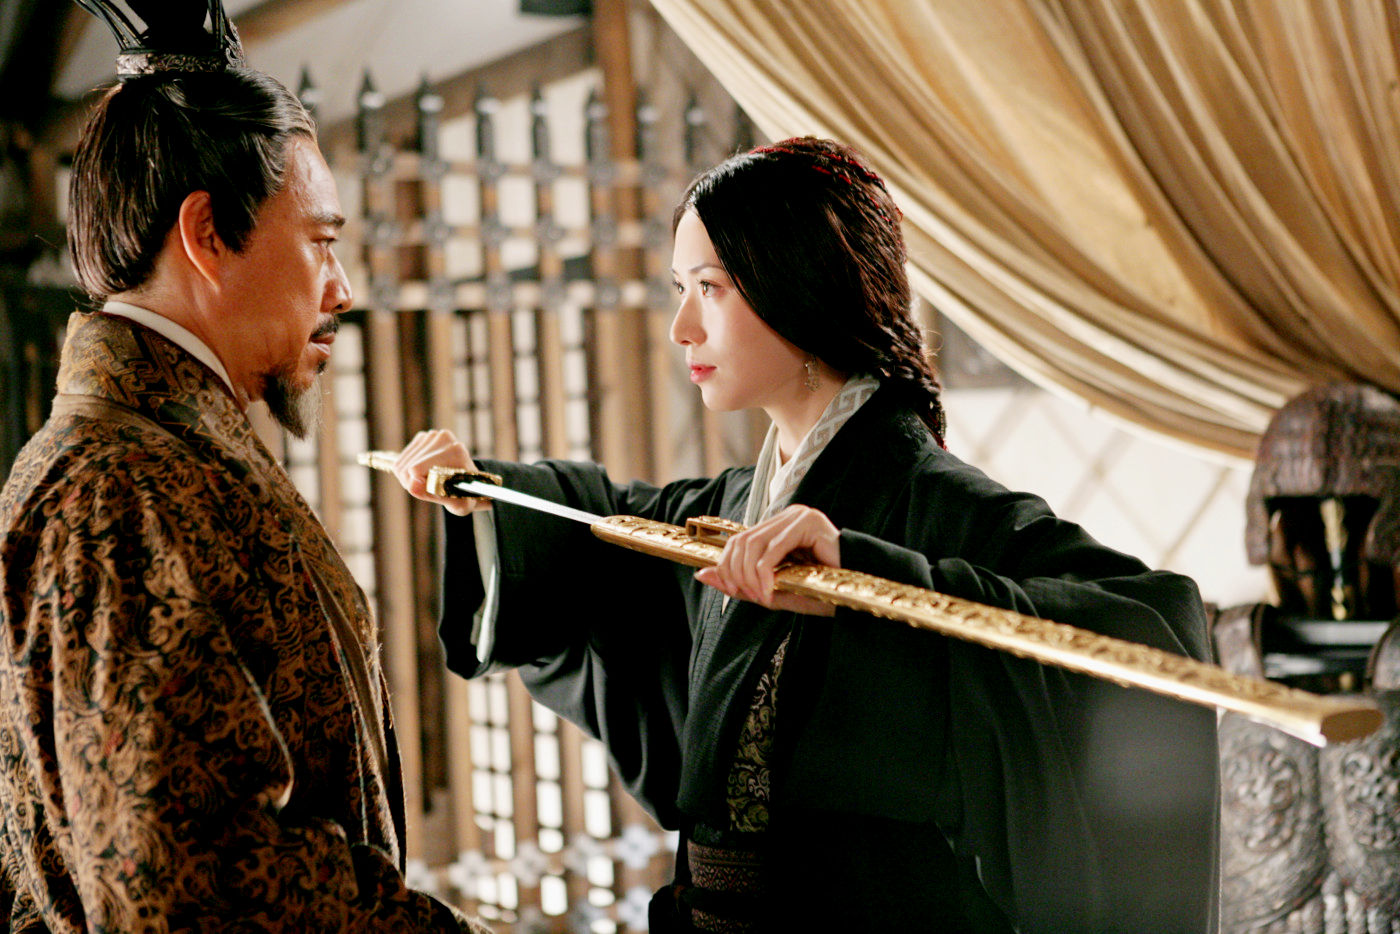 Zhang Fengyi stars as Cao Cao and Lin Chiling stars as Xiao Qiao in Magnolia Pictures' Red Cliff (2009)